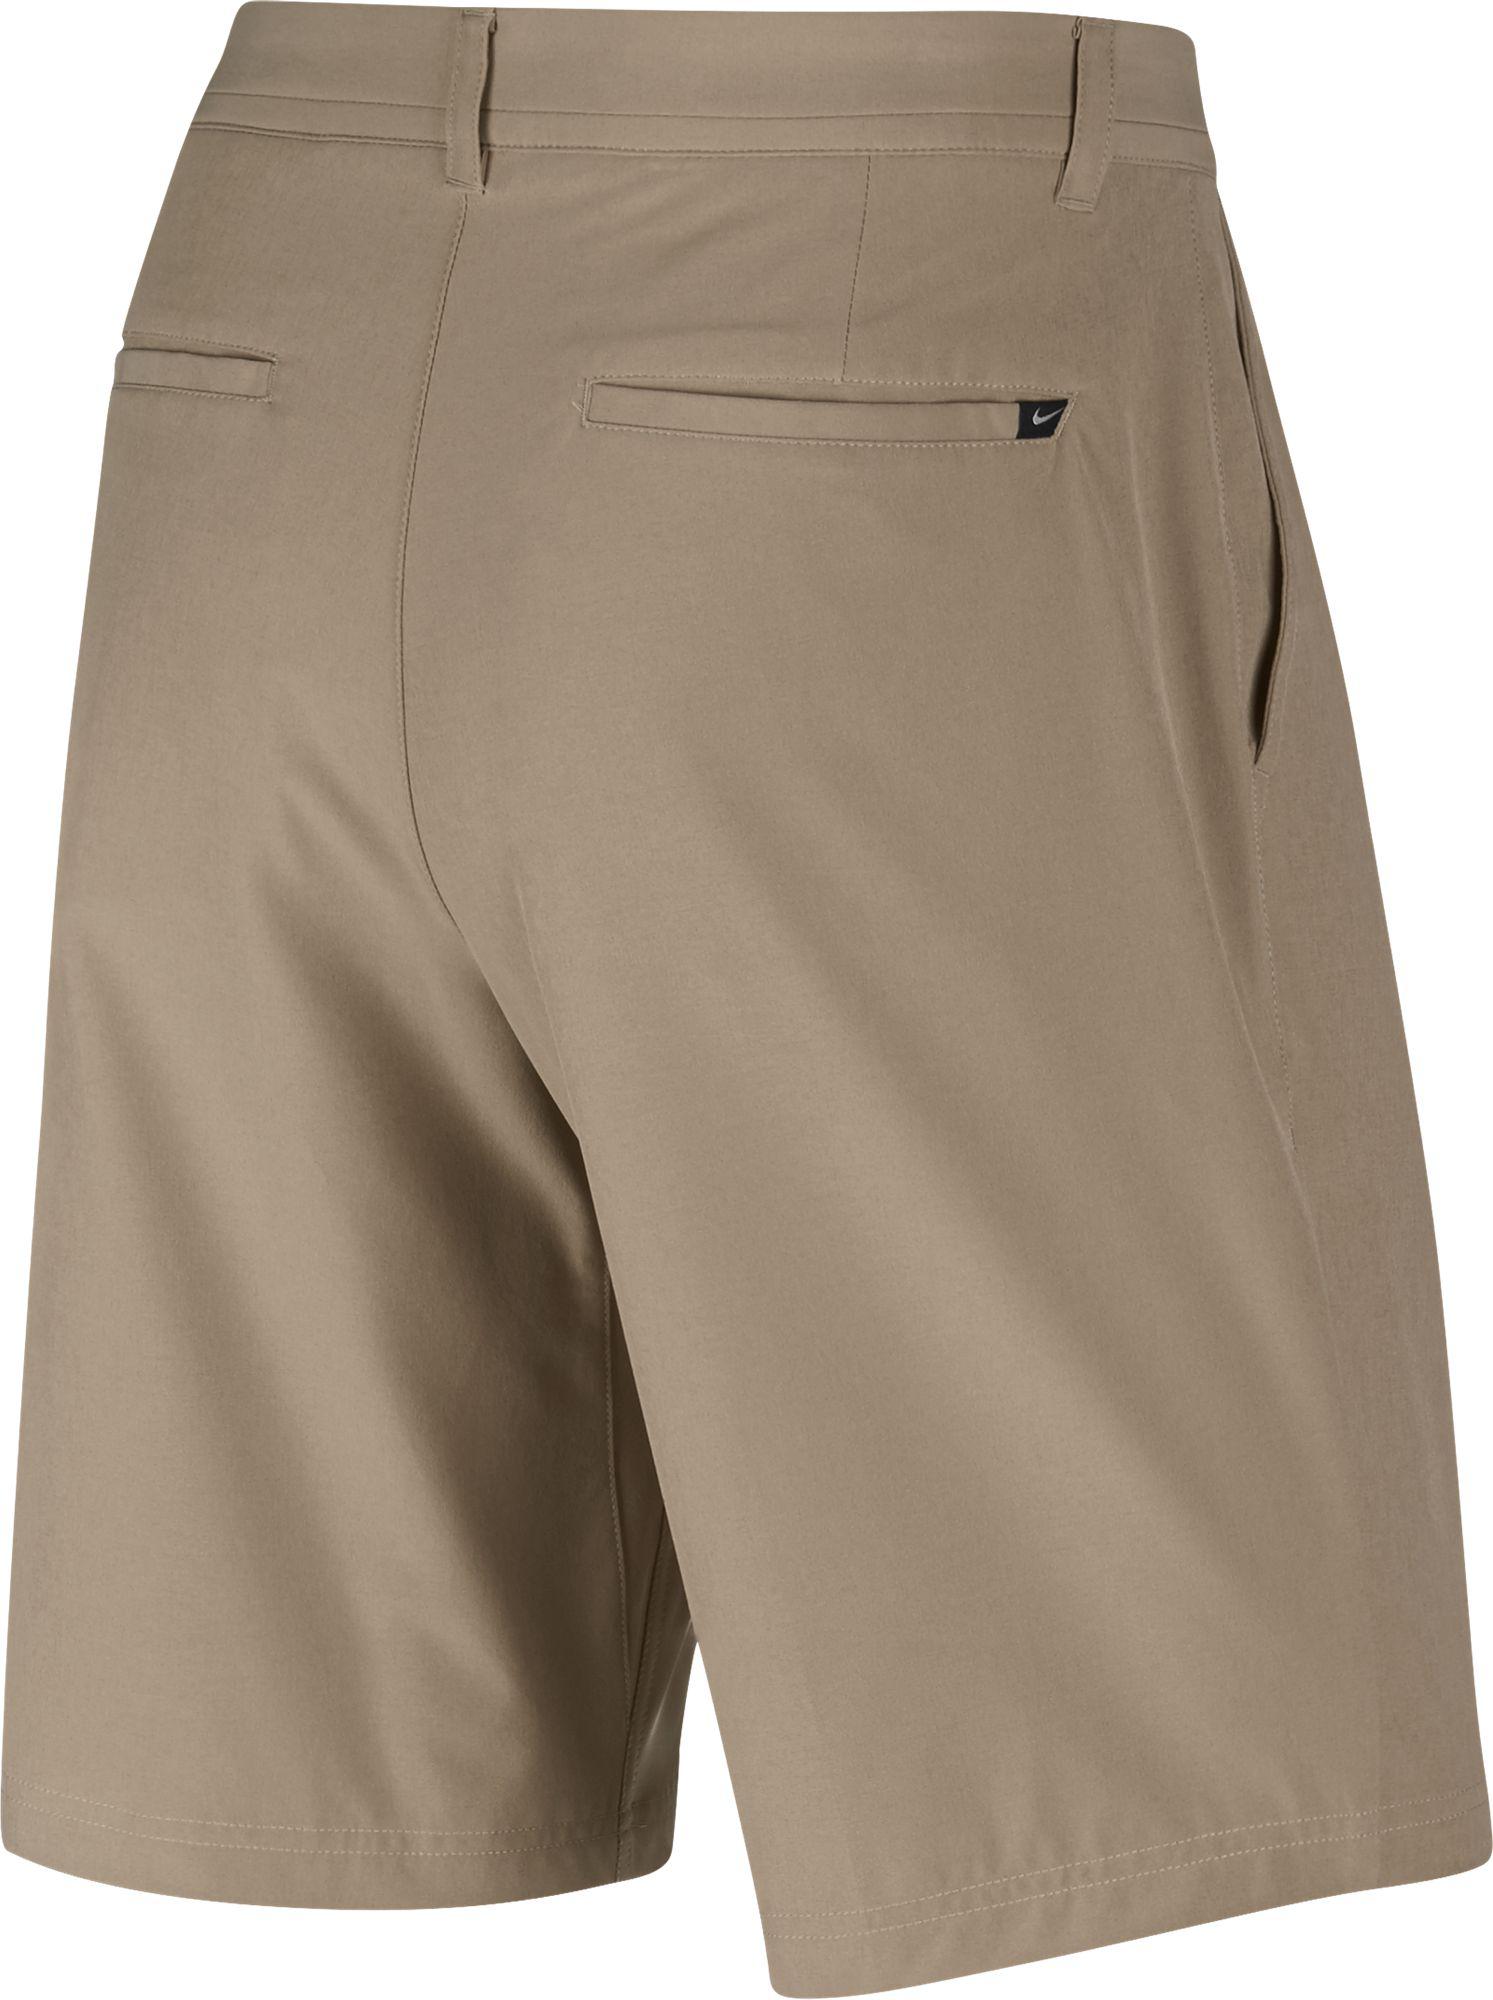 Download Nike Synthetic Flat Front Stretch Woven Golf Shorts in ...